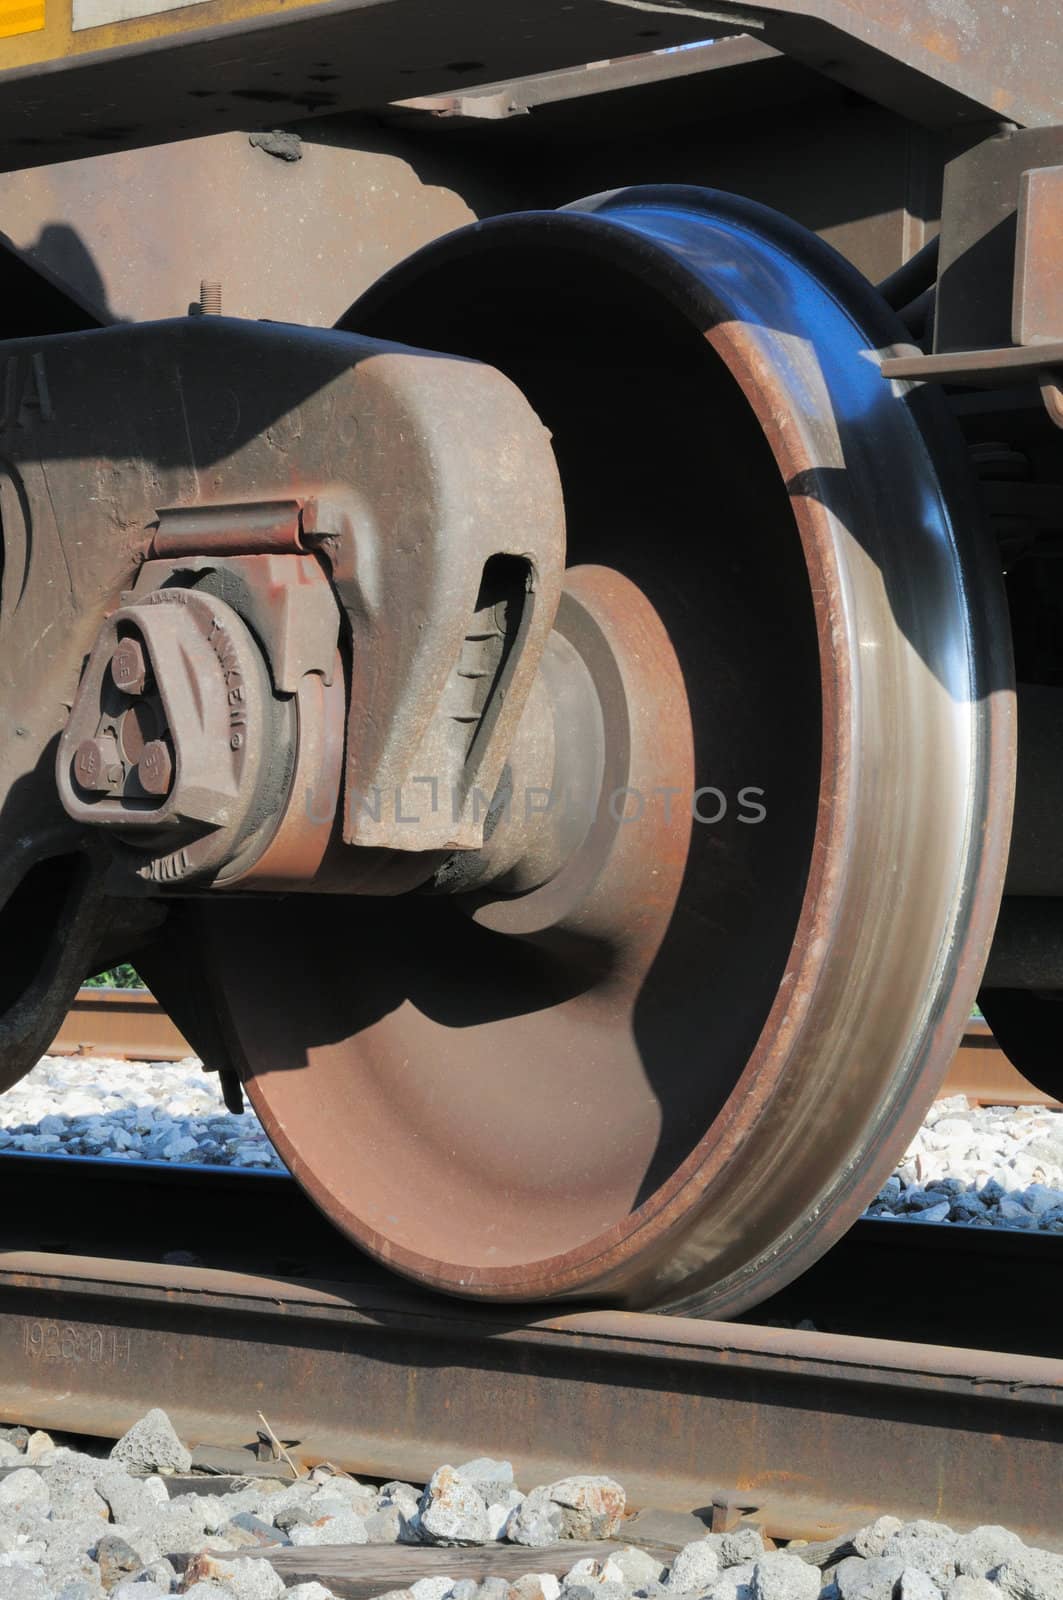 rusty and polished freight train wheel on railroad track